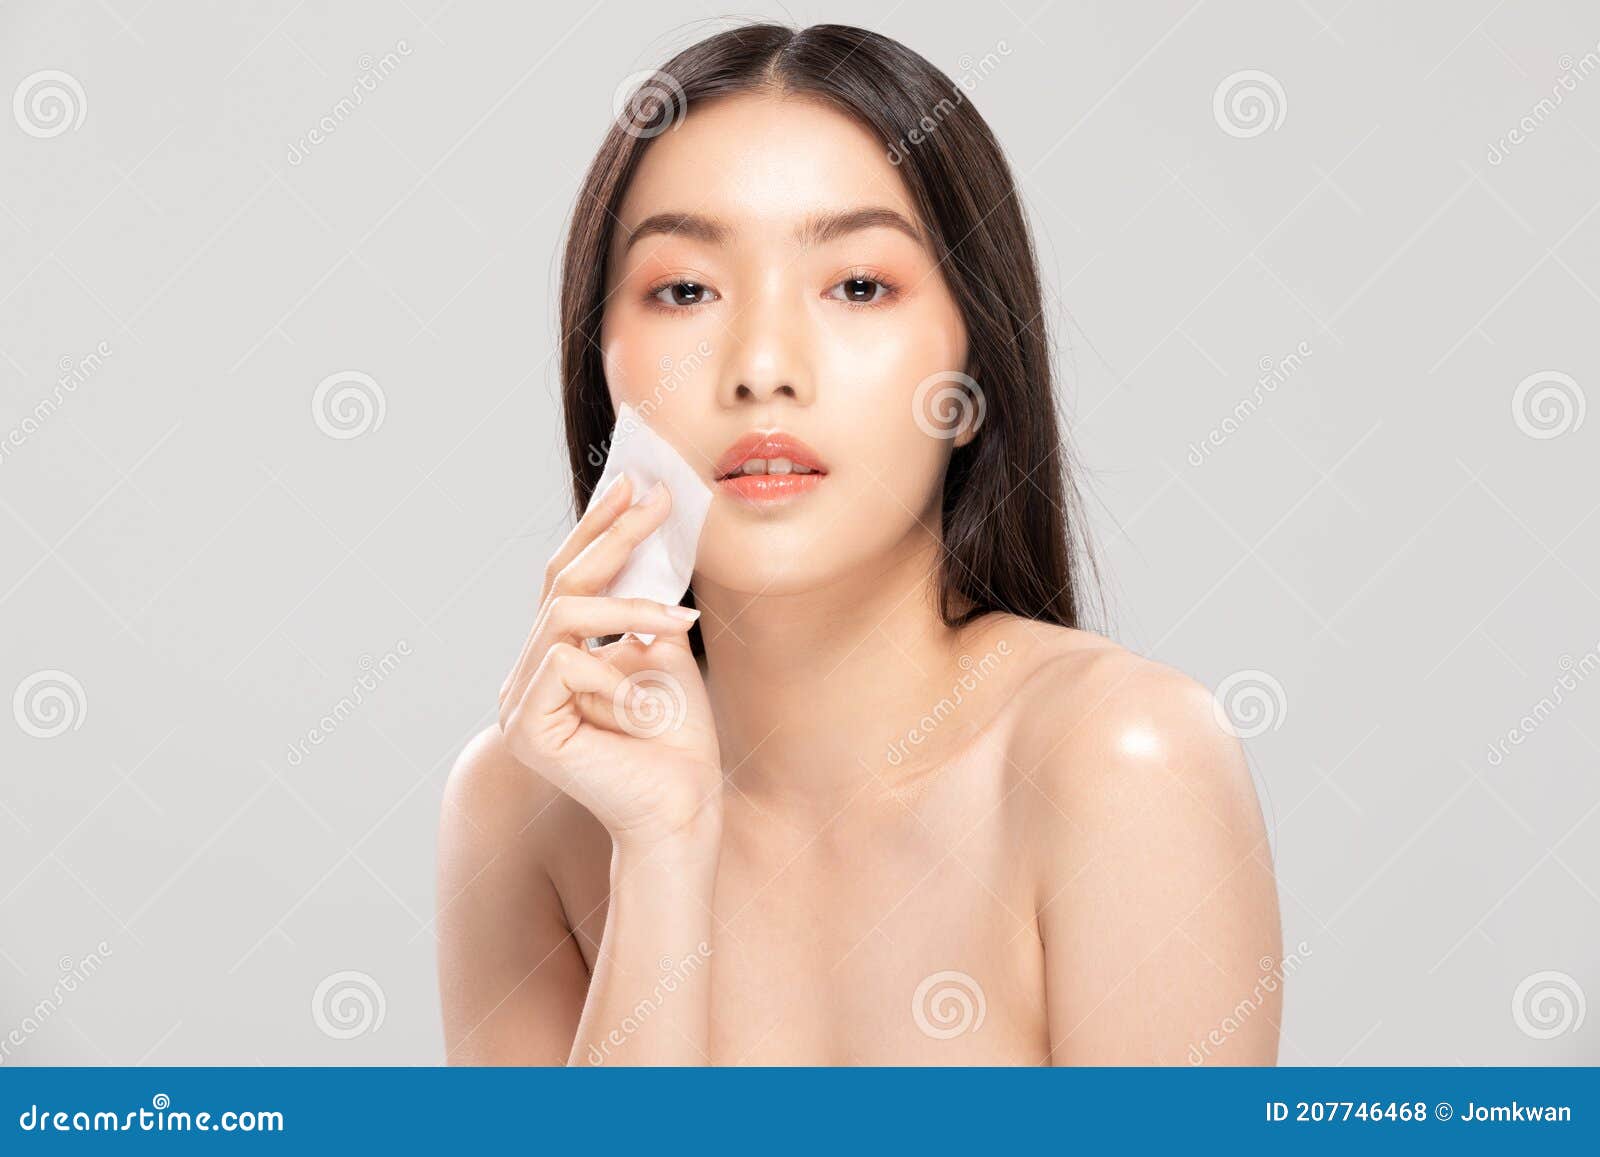 https://thumbs.dreamstime.com/z/attractive-charming-asian-young-woman-smile-using-tissue-toner-cleaning-make-up-feeling-fresh-clean-healthy-skin-207746468.jpg